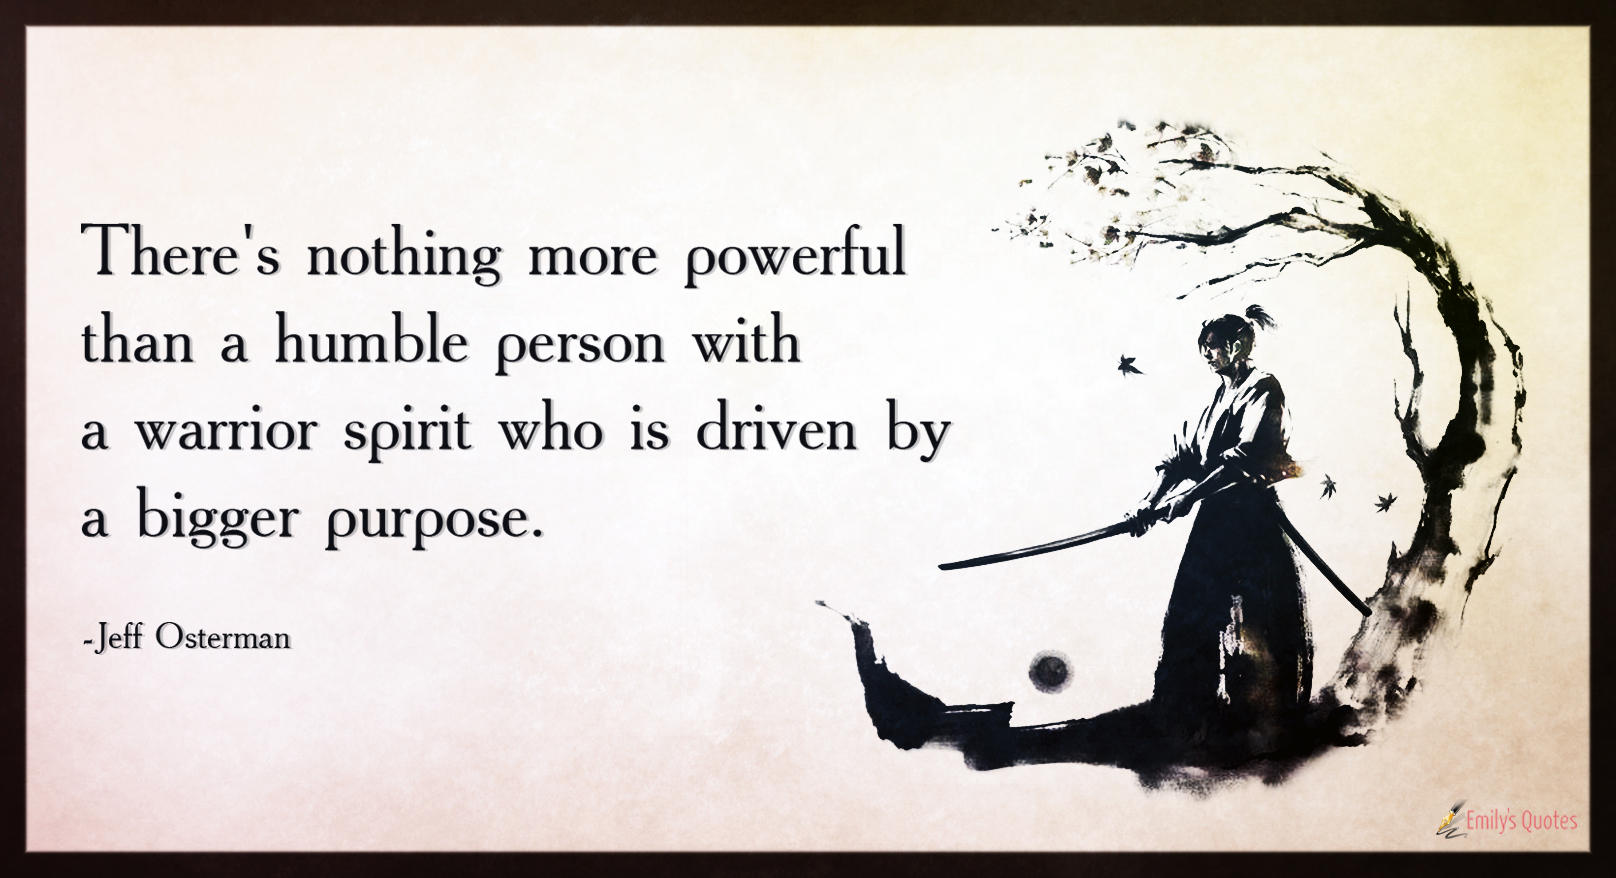 There’s nothing more powerful than a humble person with a warrior spirit who